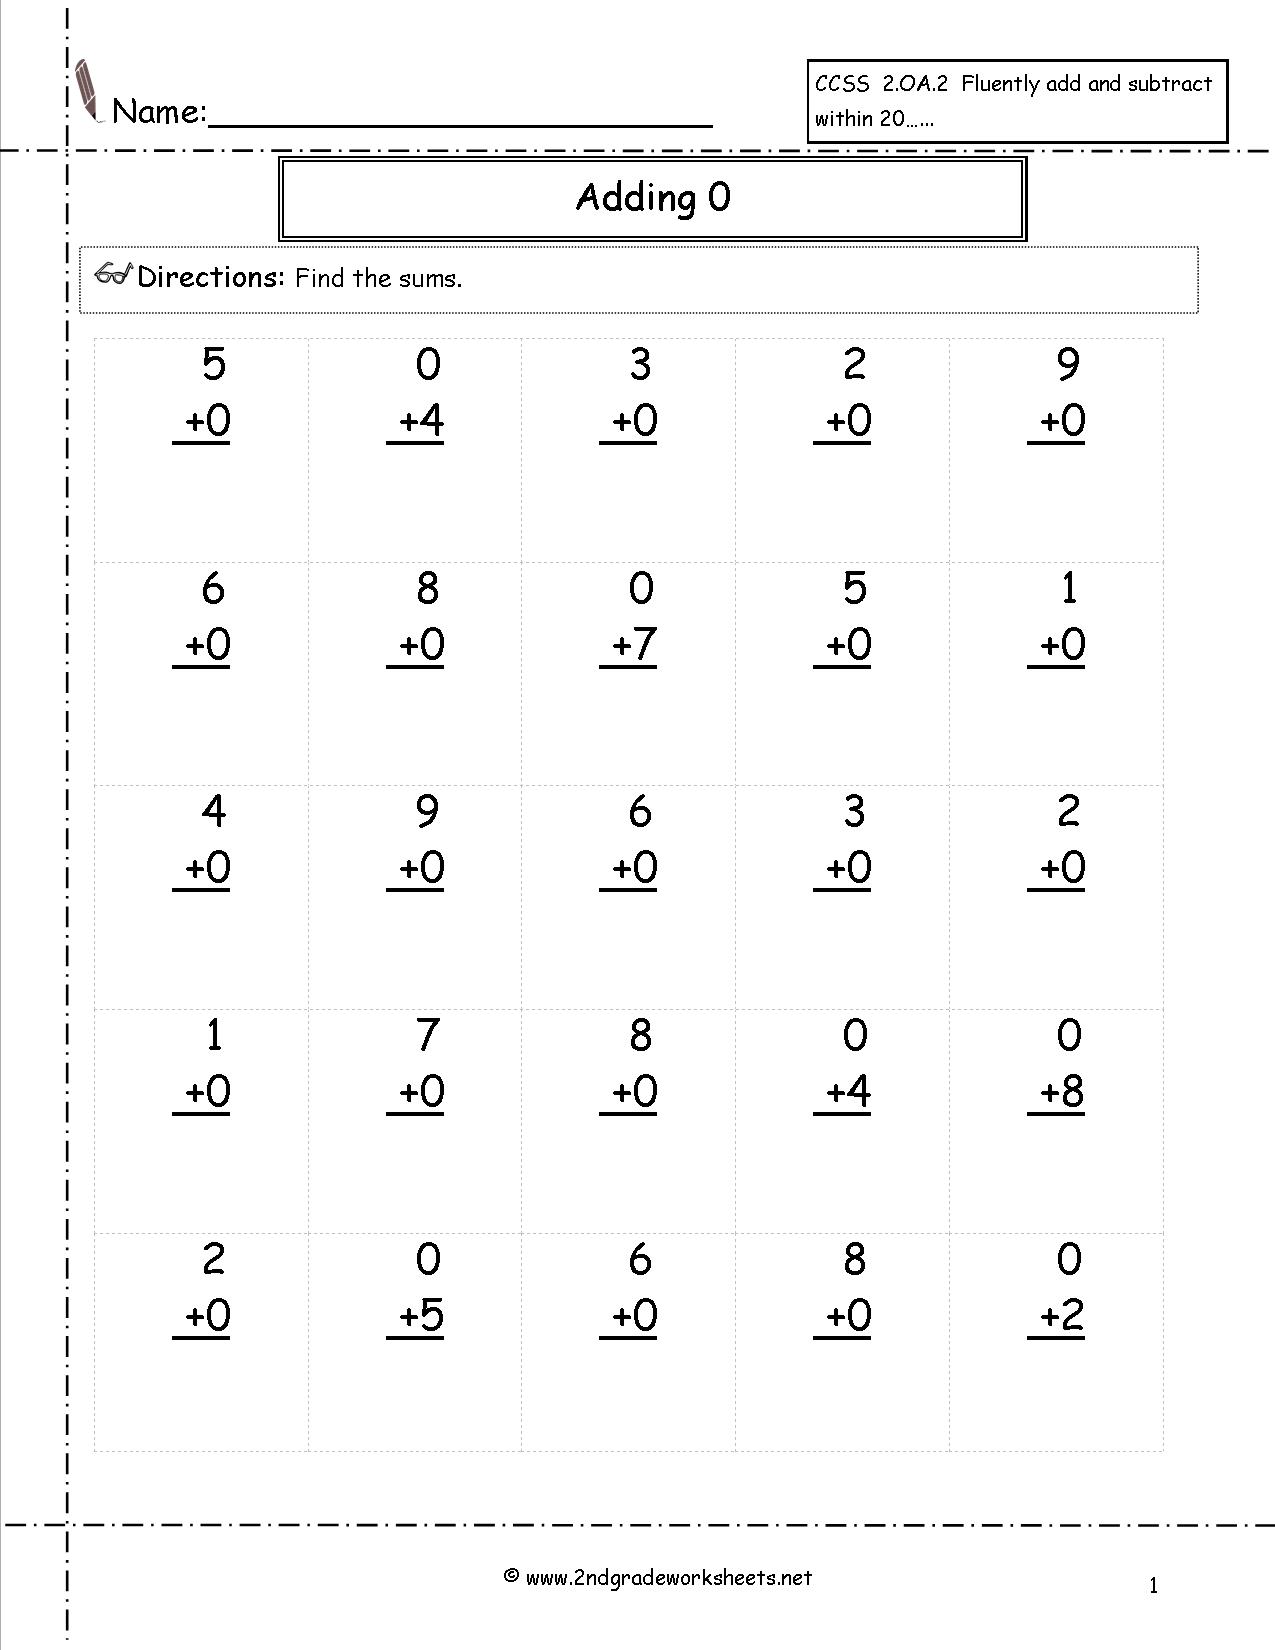 13 Best Images Of Counting Worksheets 1 20 Practice Writing Numbers 1 20 Worksheet Counting